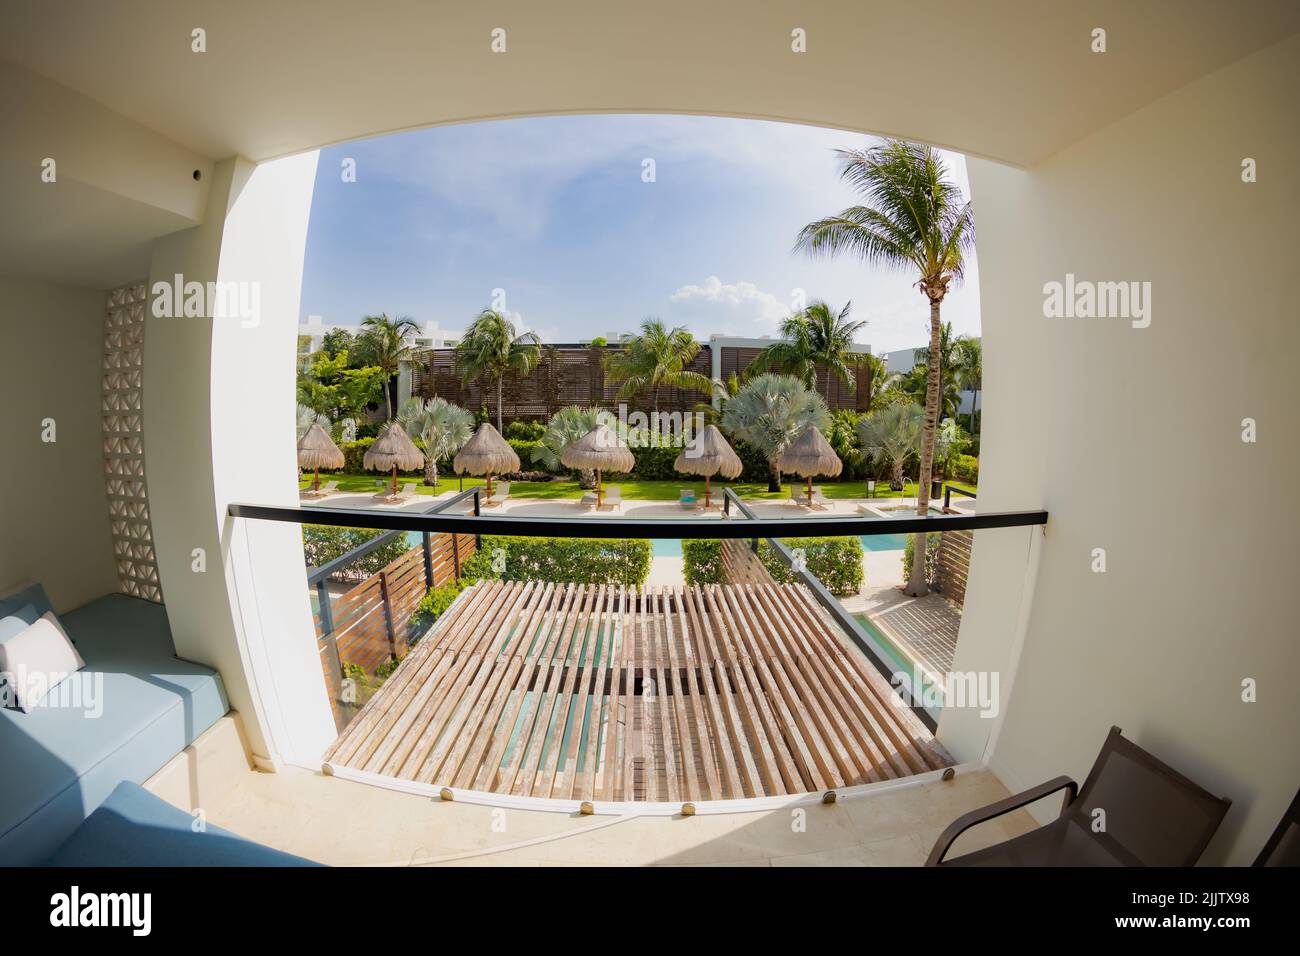 A view of a terrace with a pool, palms, and umbrellas from the hotel room balcony shot with a fish eye lens Stock Photo